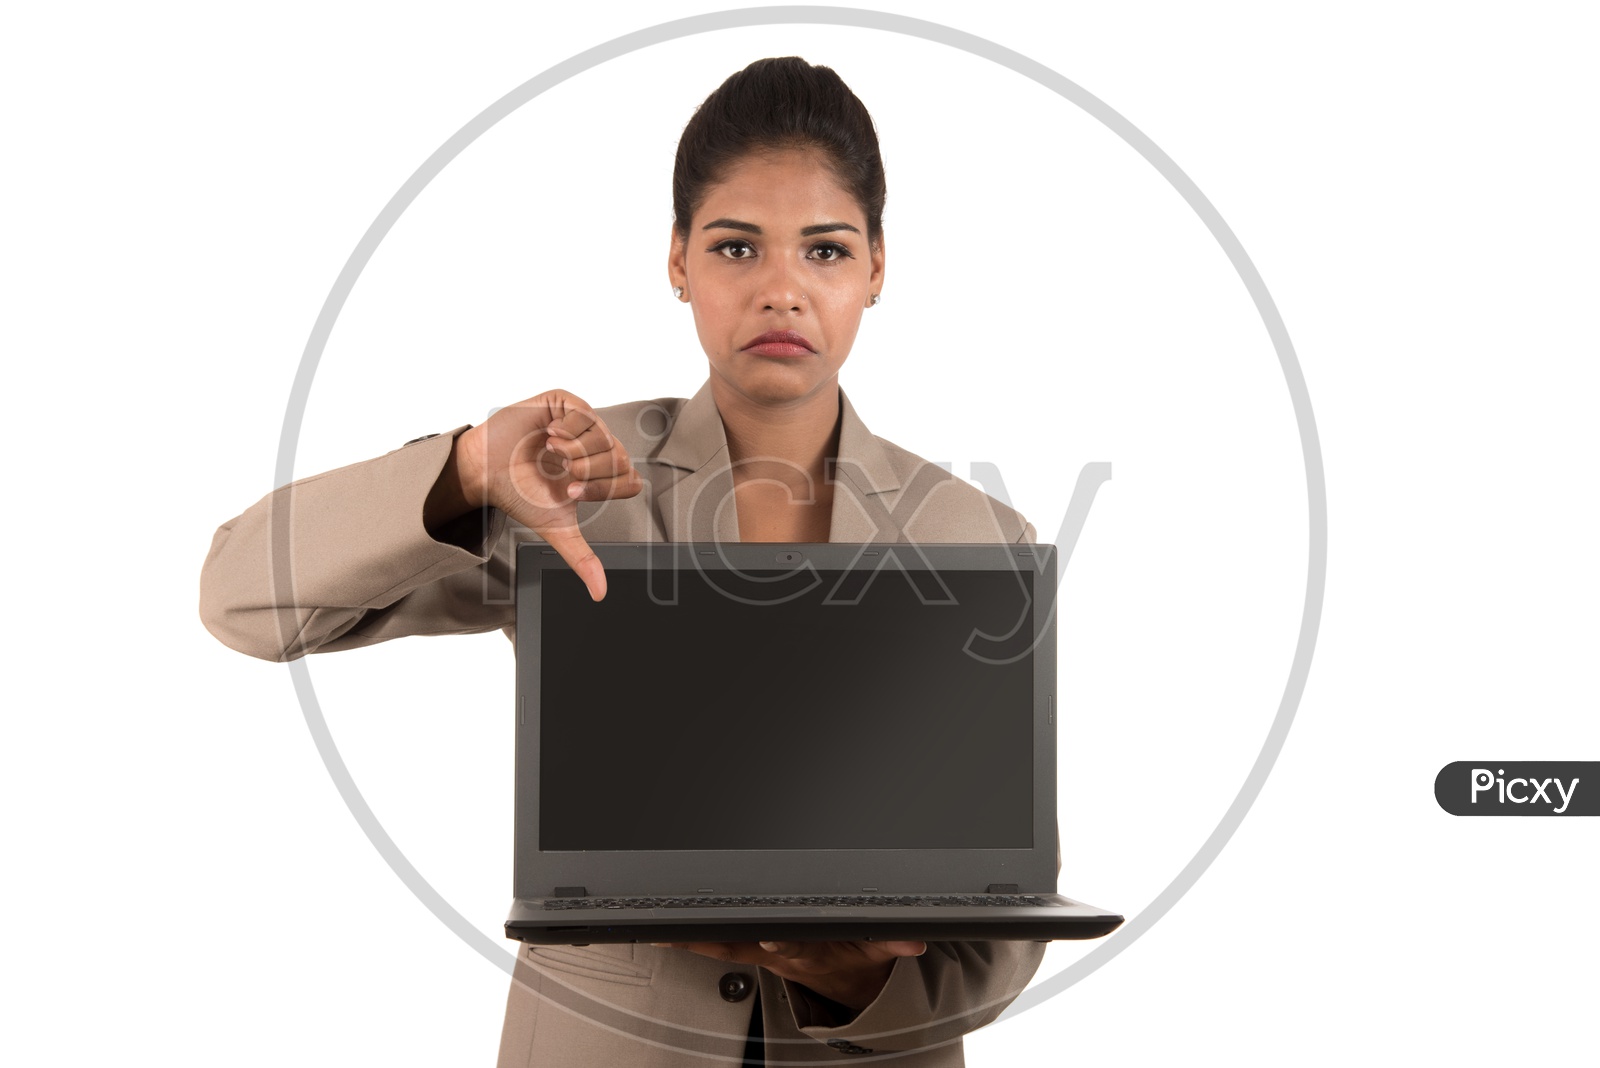 Young Indian business woman holding a laptop giving thumbs down sign